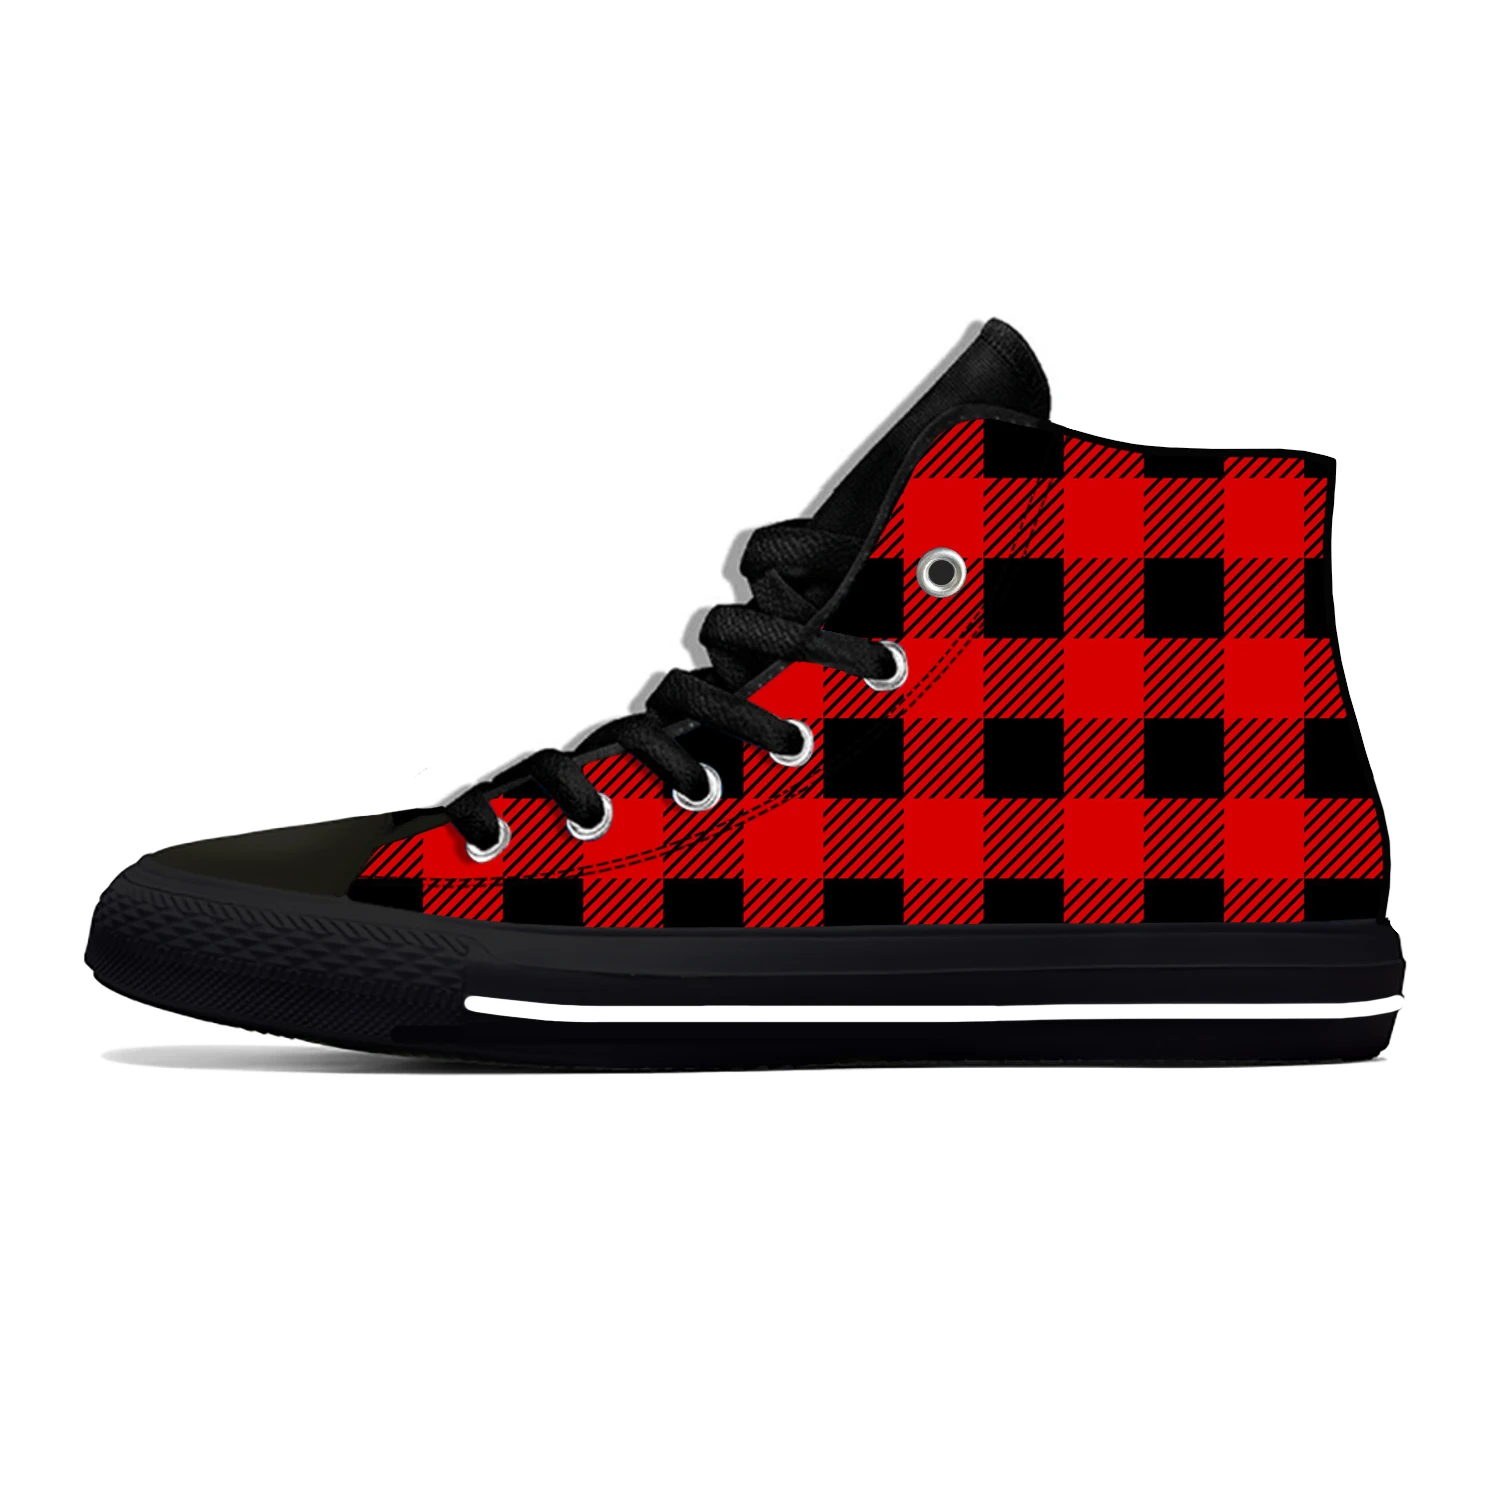 

Hot Buffalo Plaid Check Scottish Tartan Aesthetic Casual Cloth Shoes High Top Lightweight Breathable 3D Print Men Women Sneakers